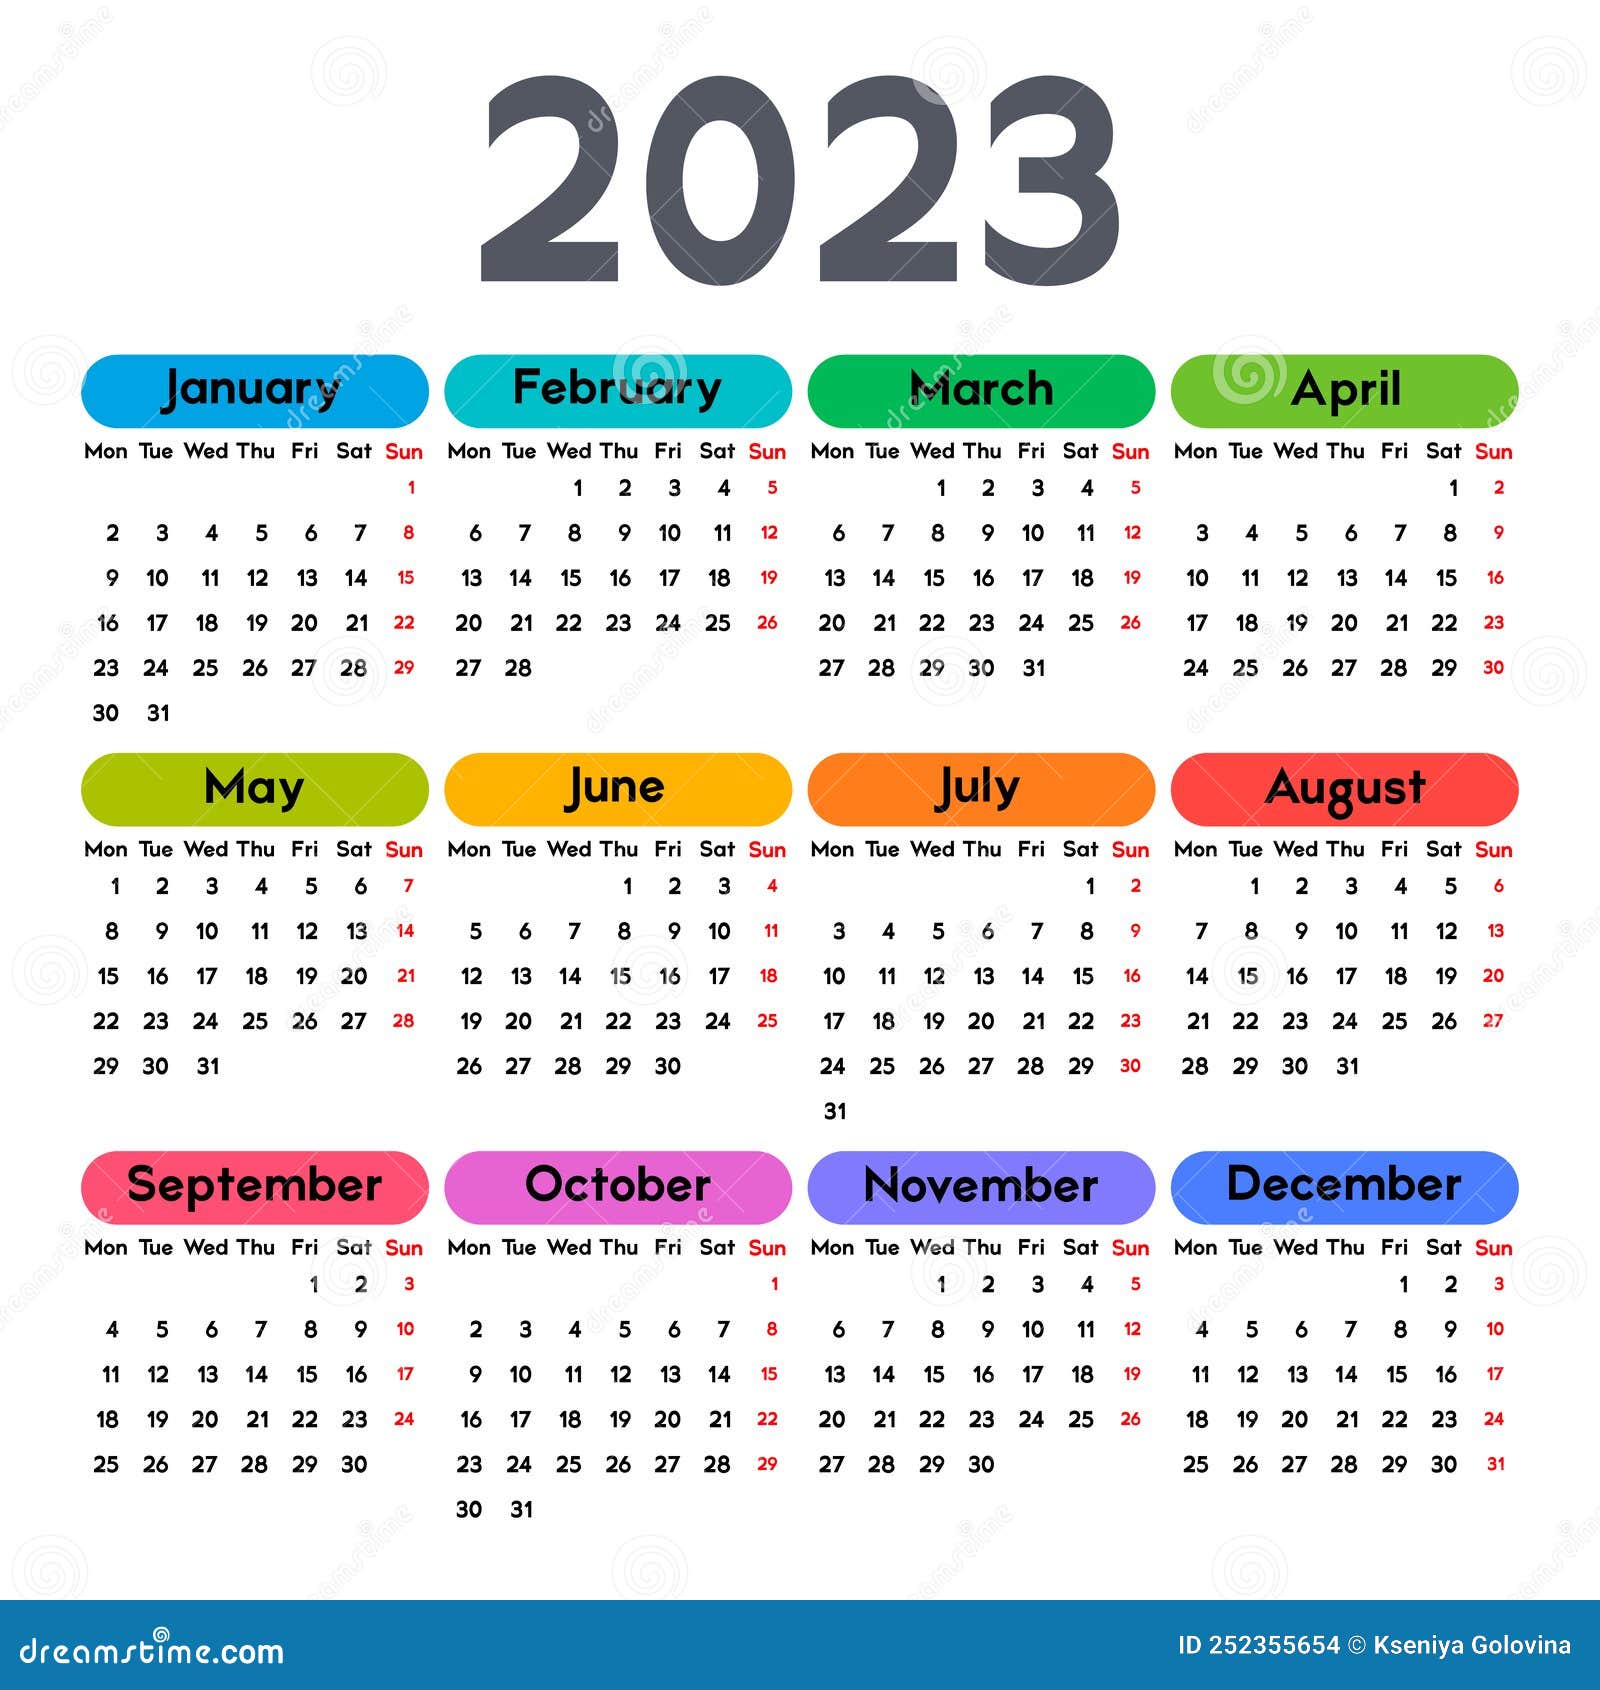 Calendar 2023, Week Starts on Monday, Basic Template with a Bright